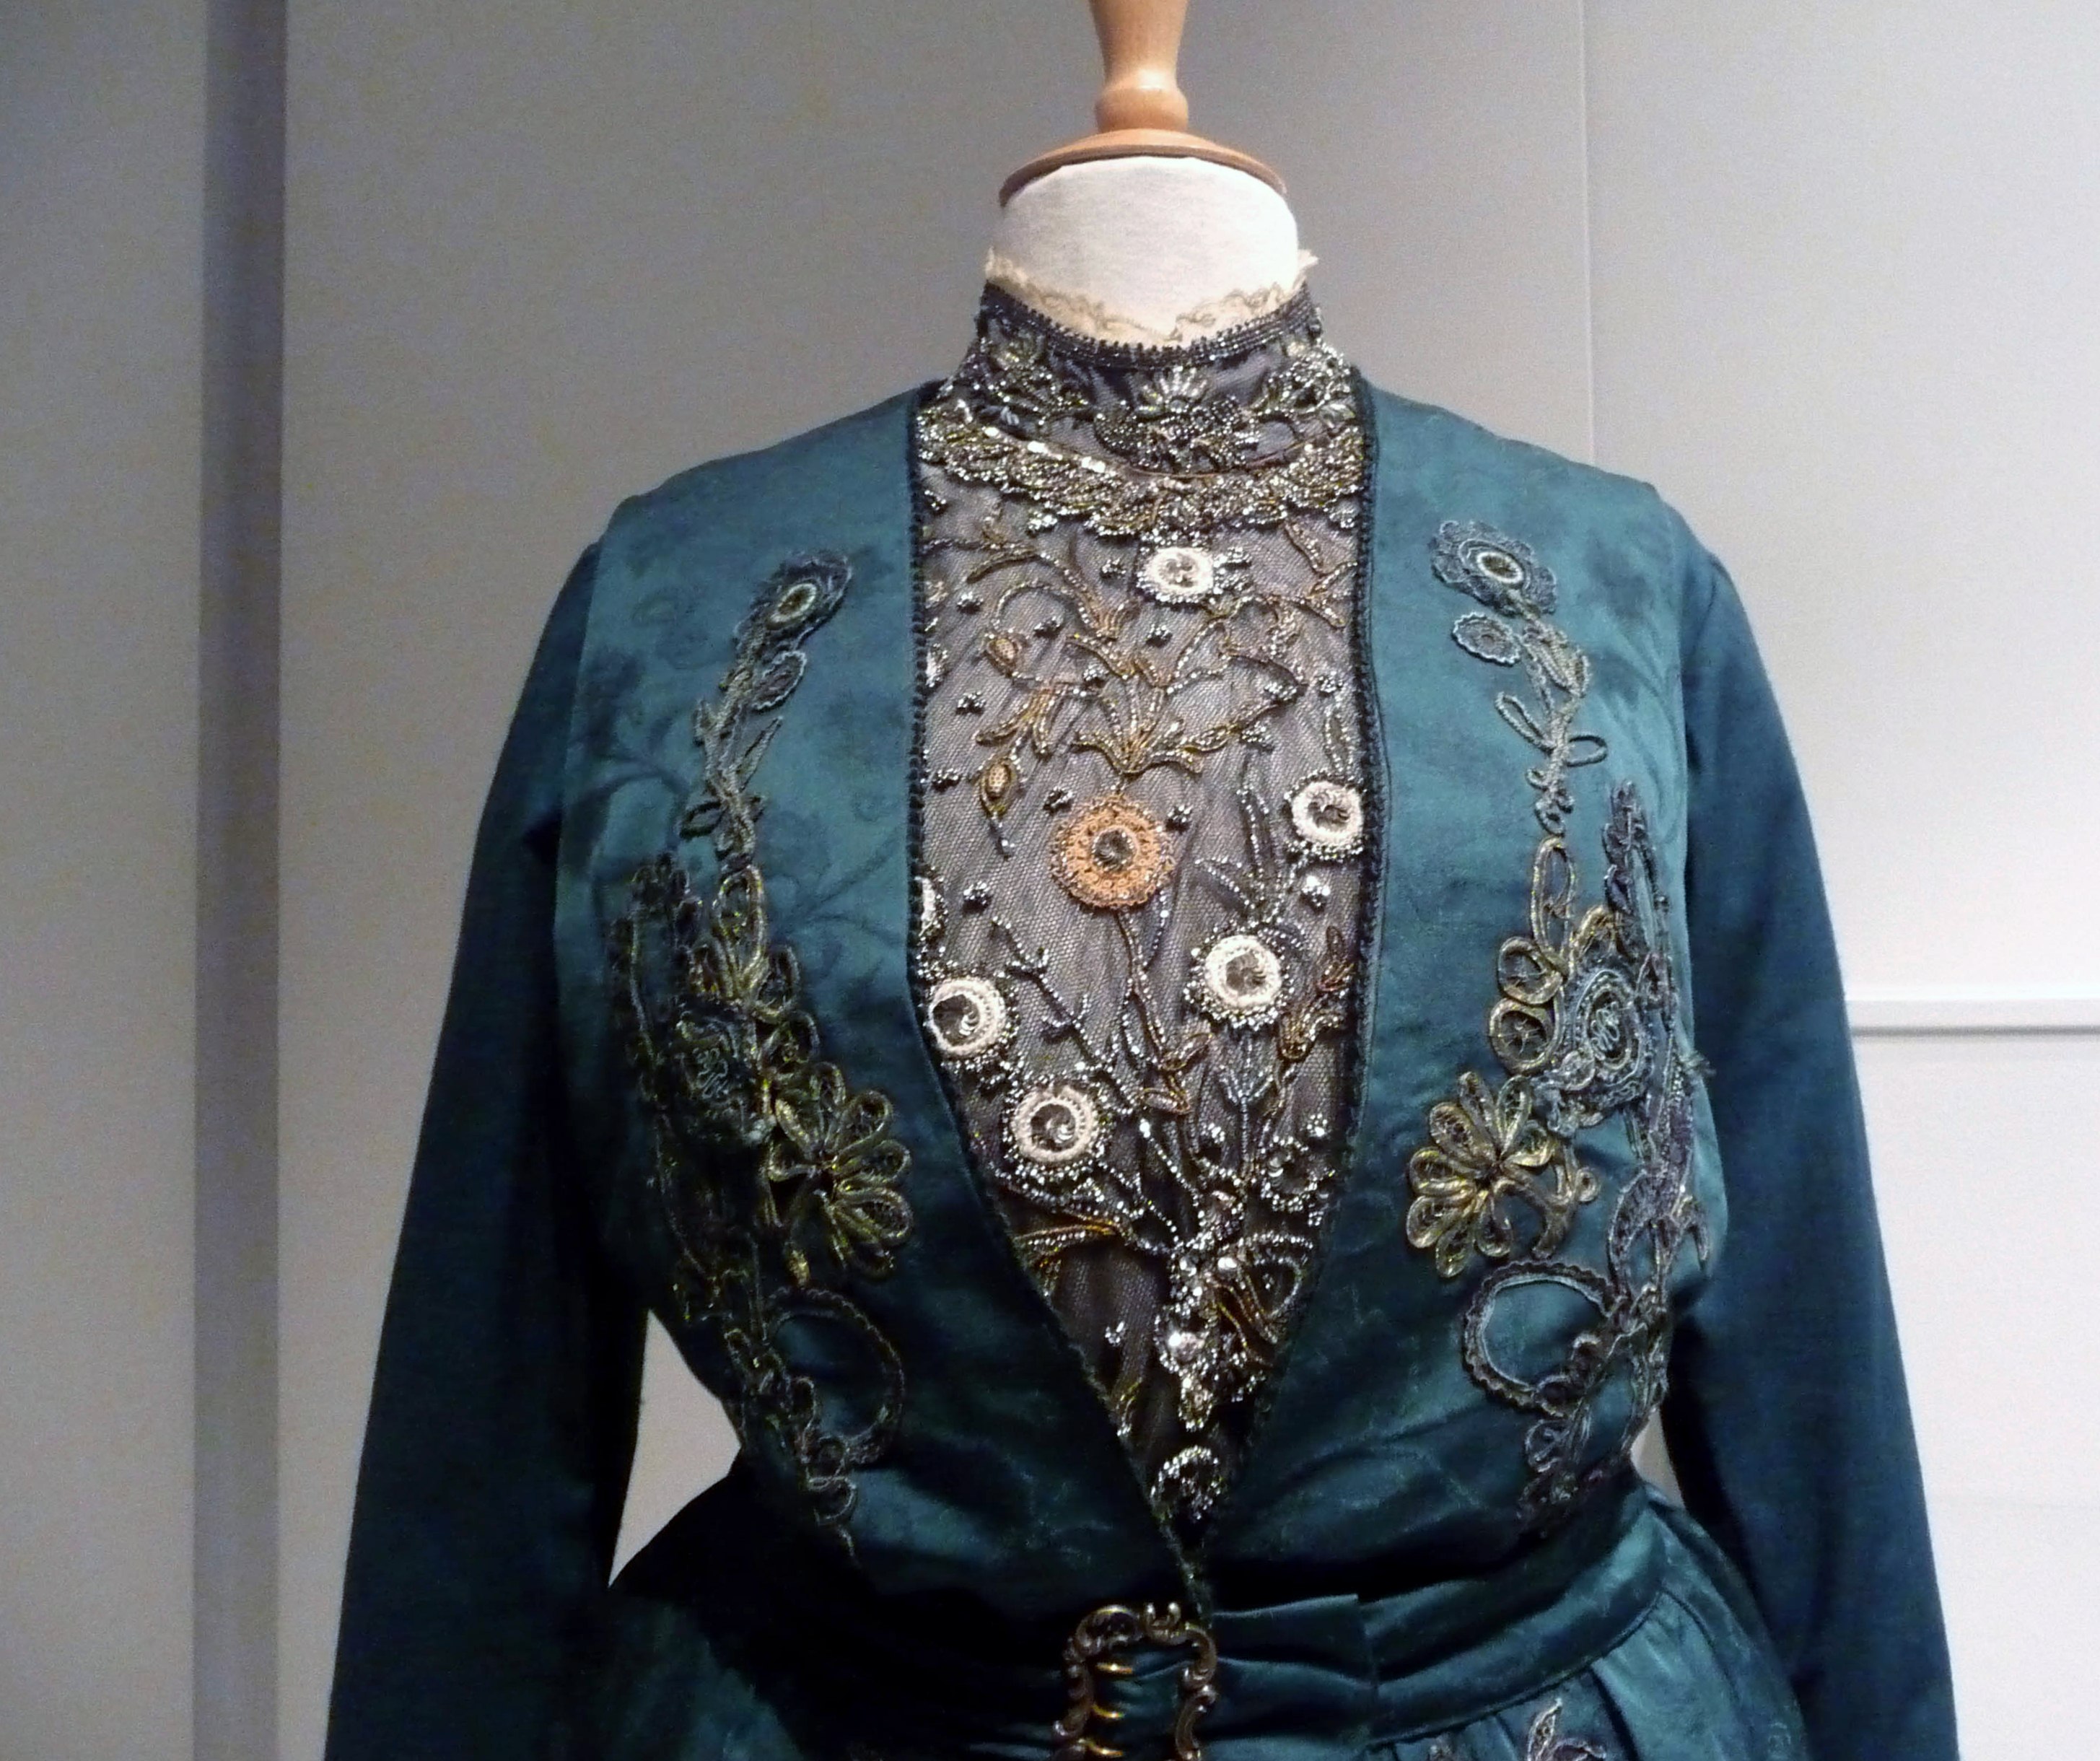 (detail) DAY DRESS, silk with embroidered detail, made by Cosprop, 2009. Worn by Dame Maggie Smith as Dowager Countess of Grantham in Downton Abbey